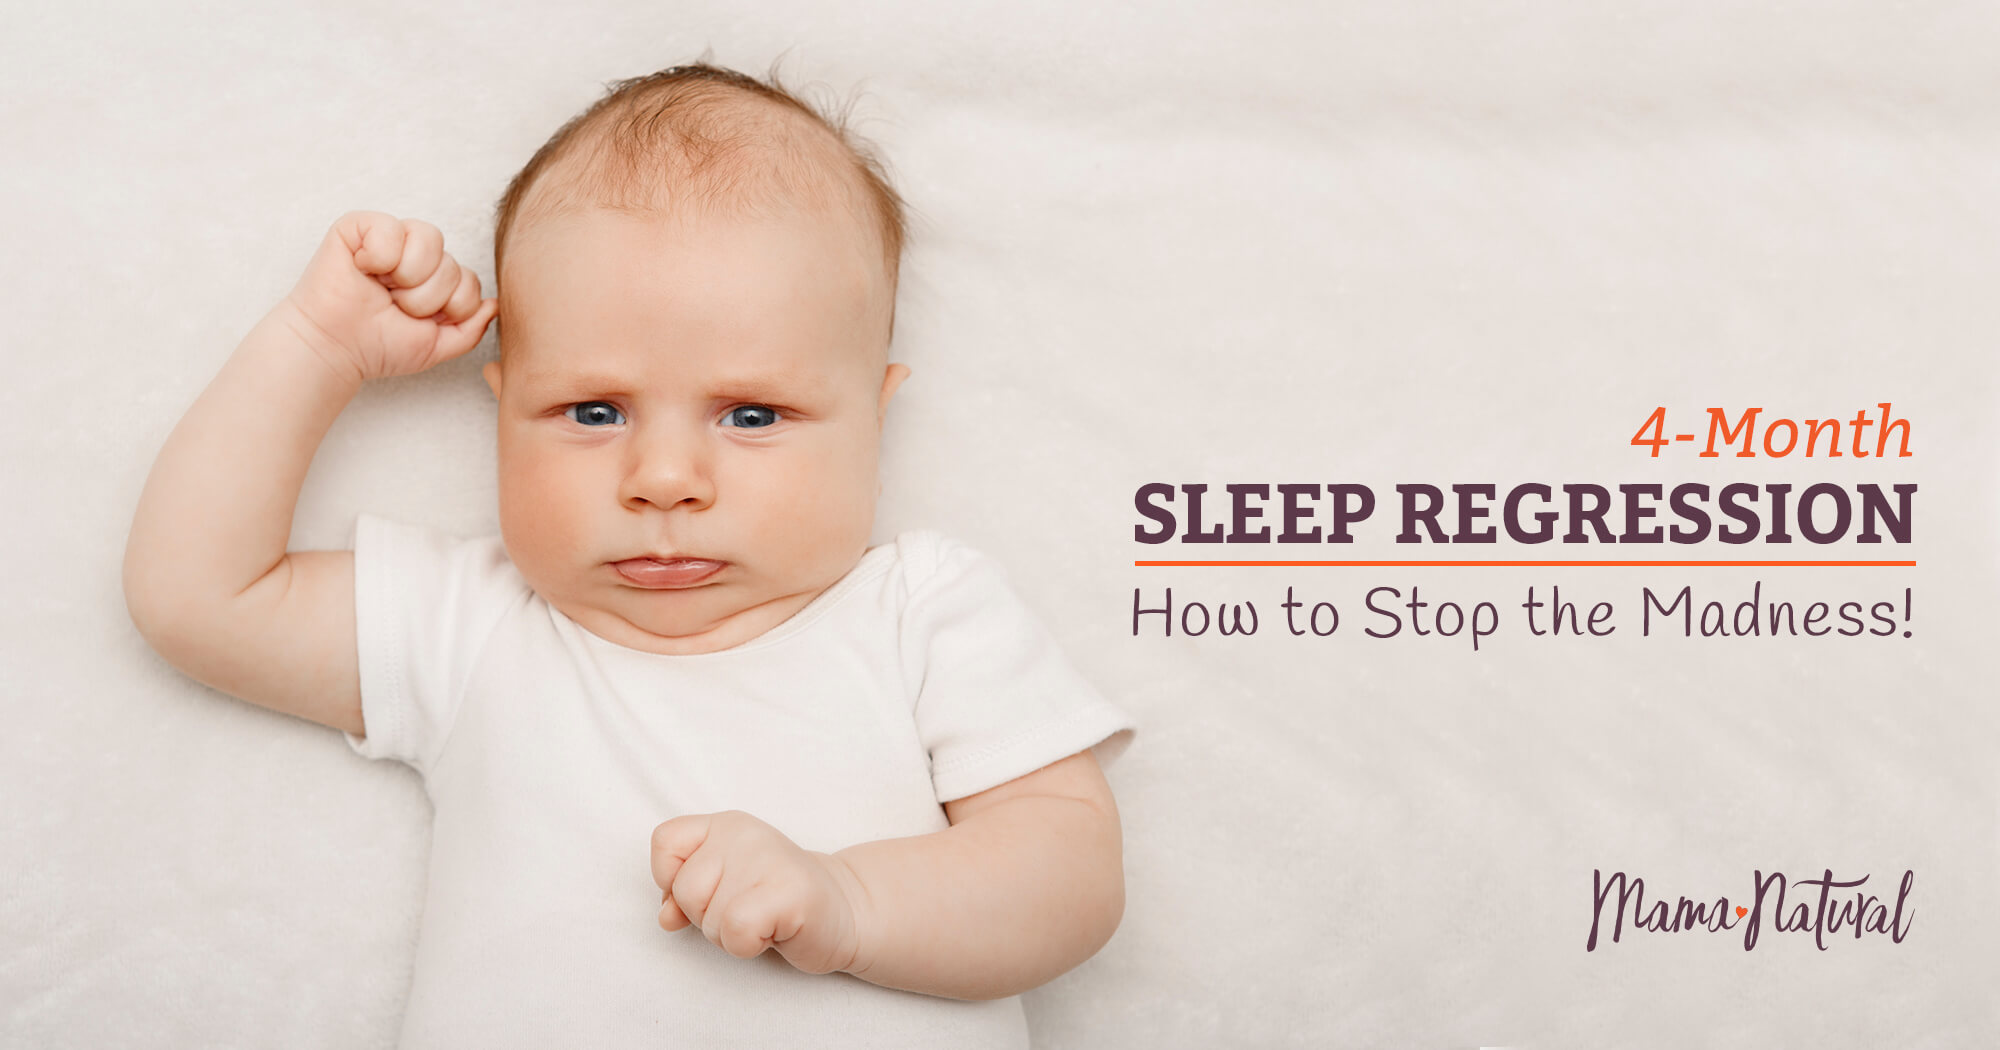 https://www.mamanatural.com/wp-content/uploads/4-Month-Sleep-Regression-How-to-Stop-the-Madness-Mama-Natural-Facebook.jpg